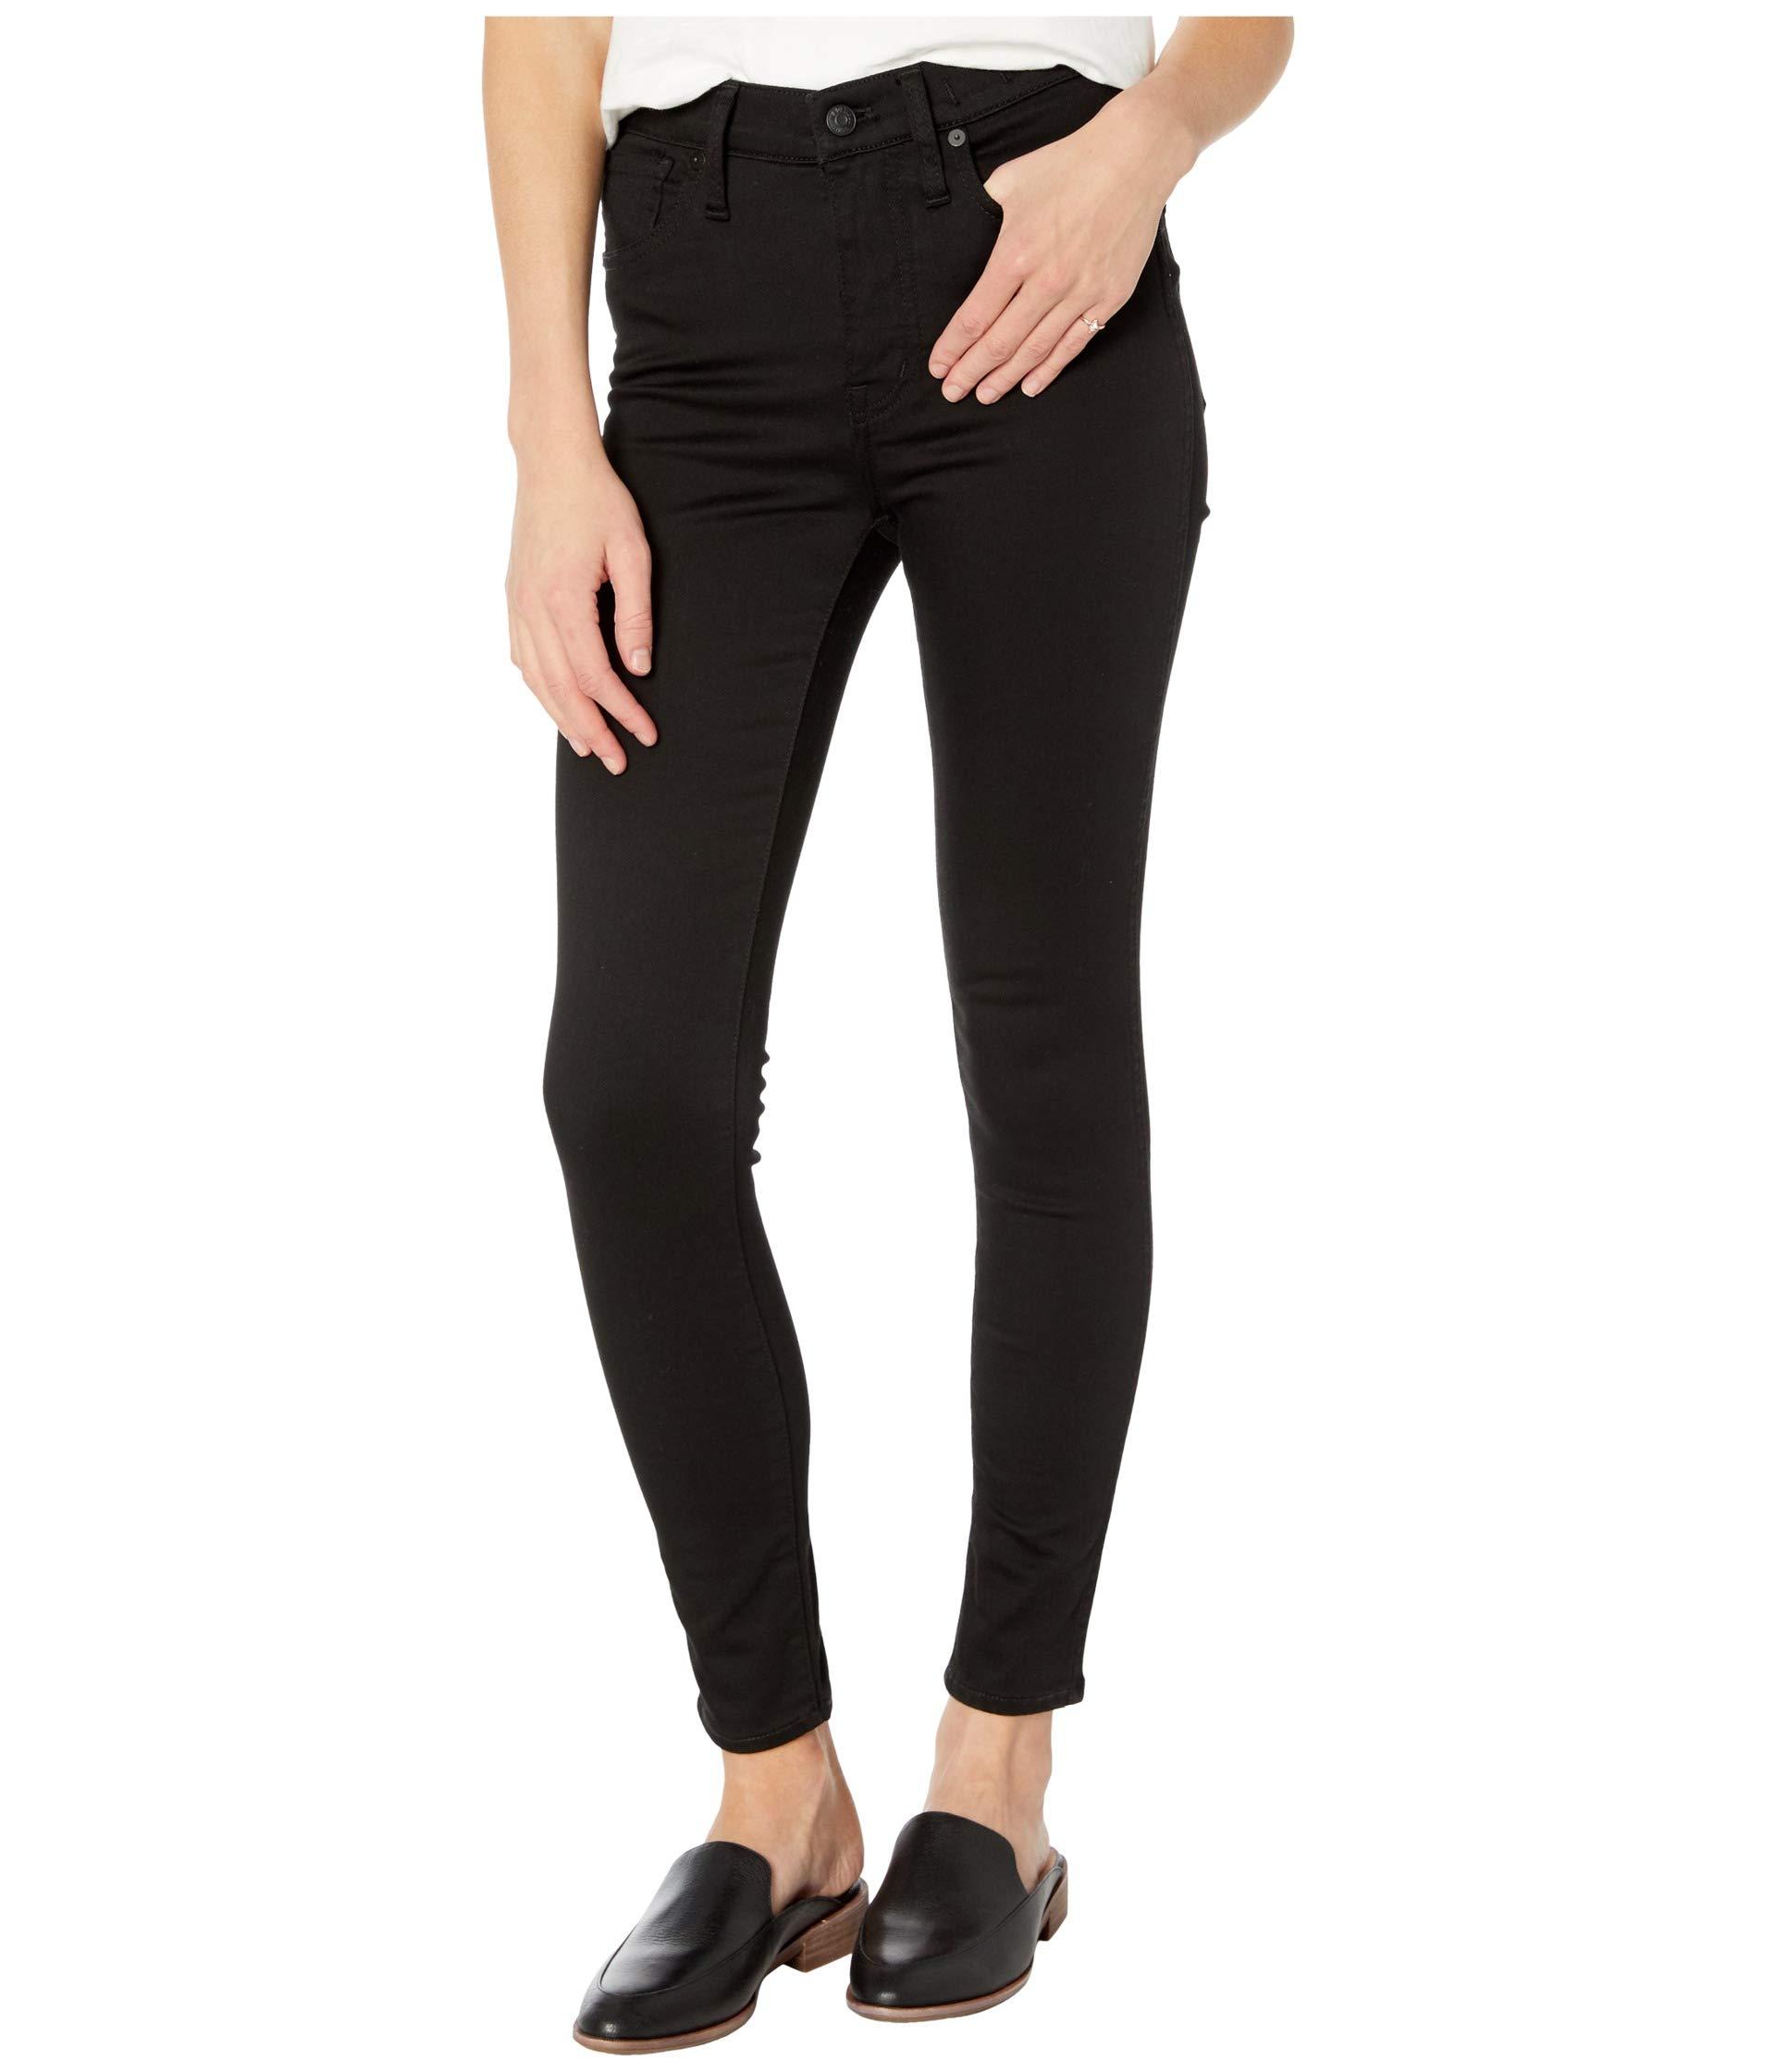 Madewell Denim 10 High-rise Skinny Jeans In Carbondale Wash in Black - Lyst